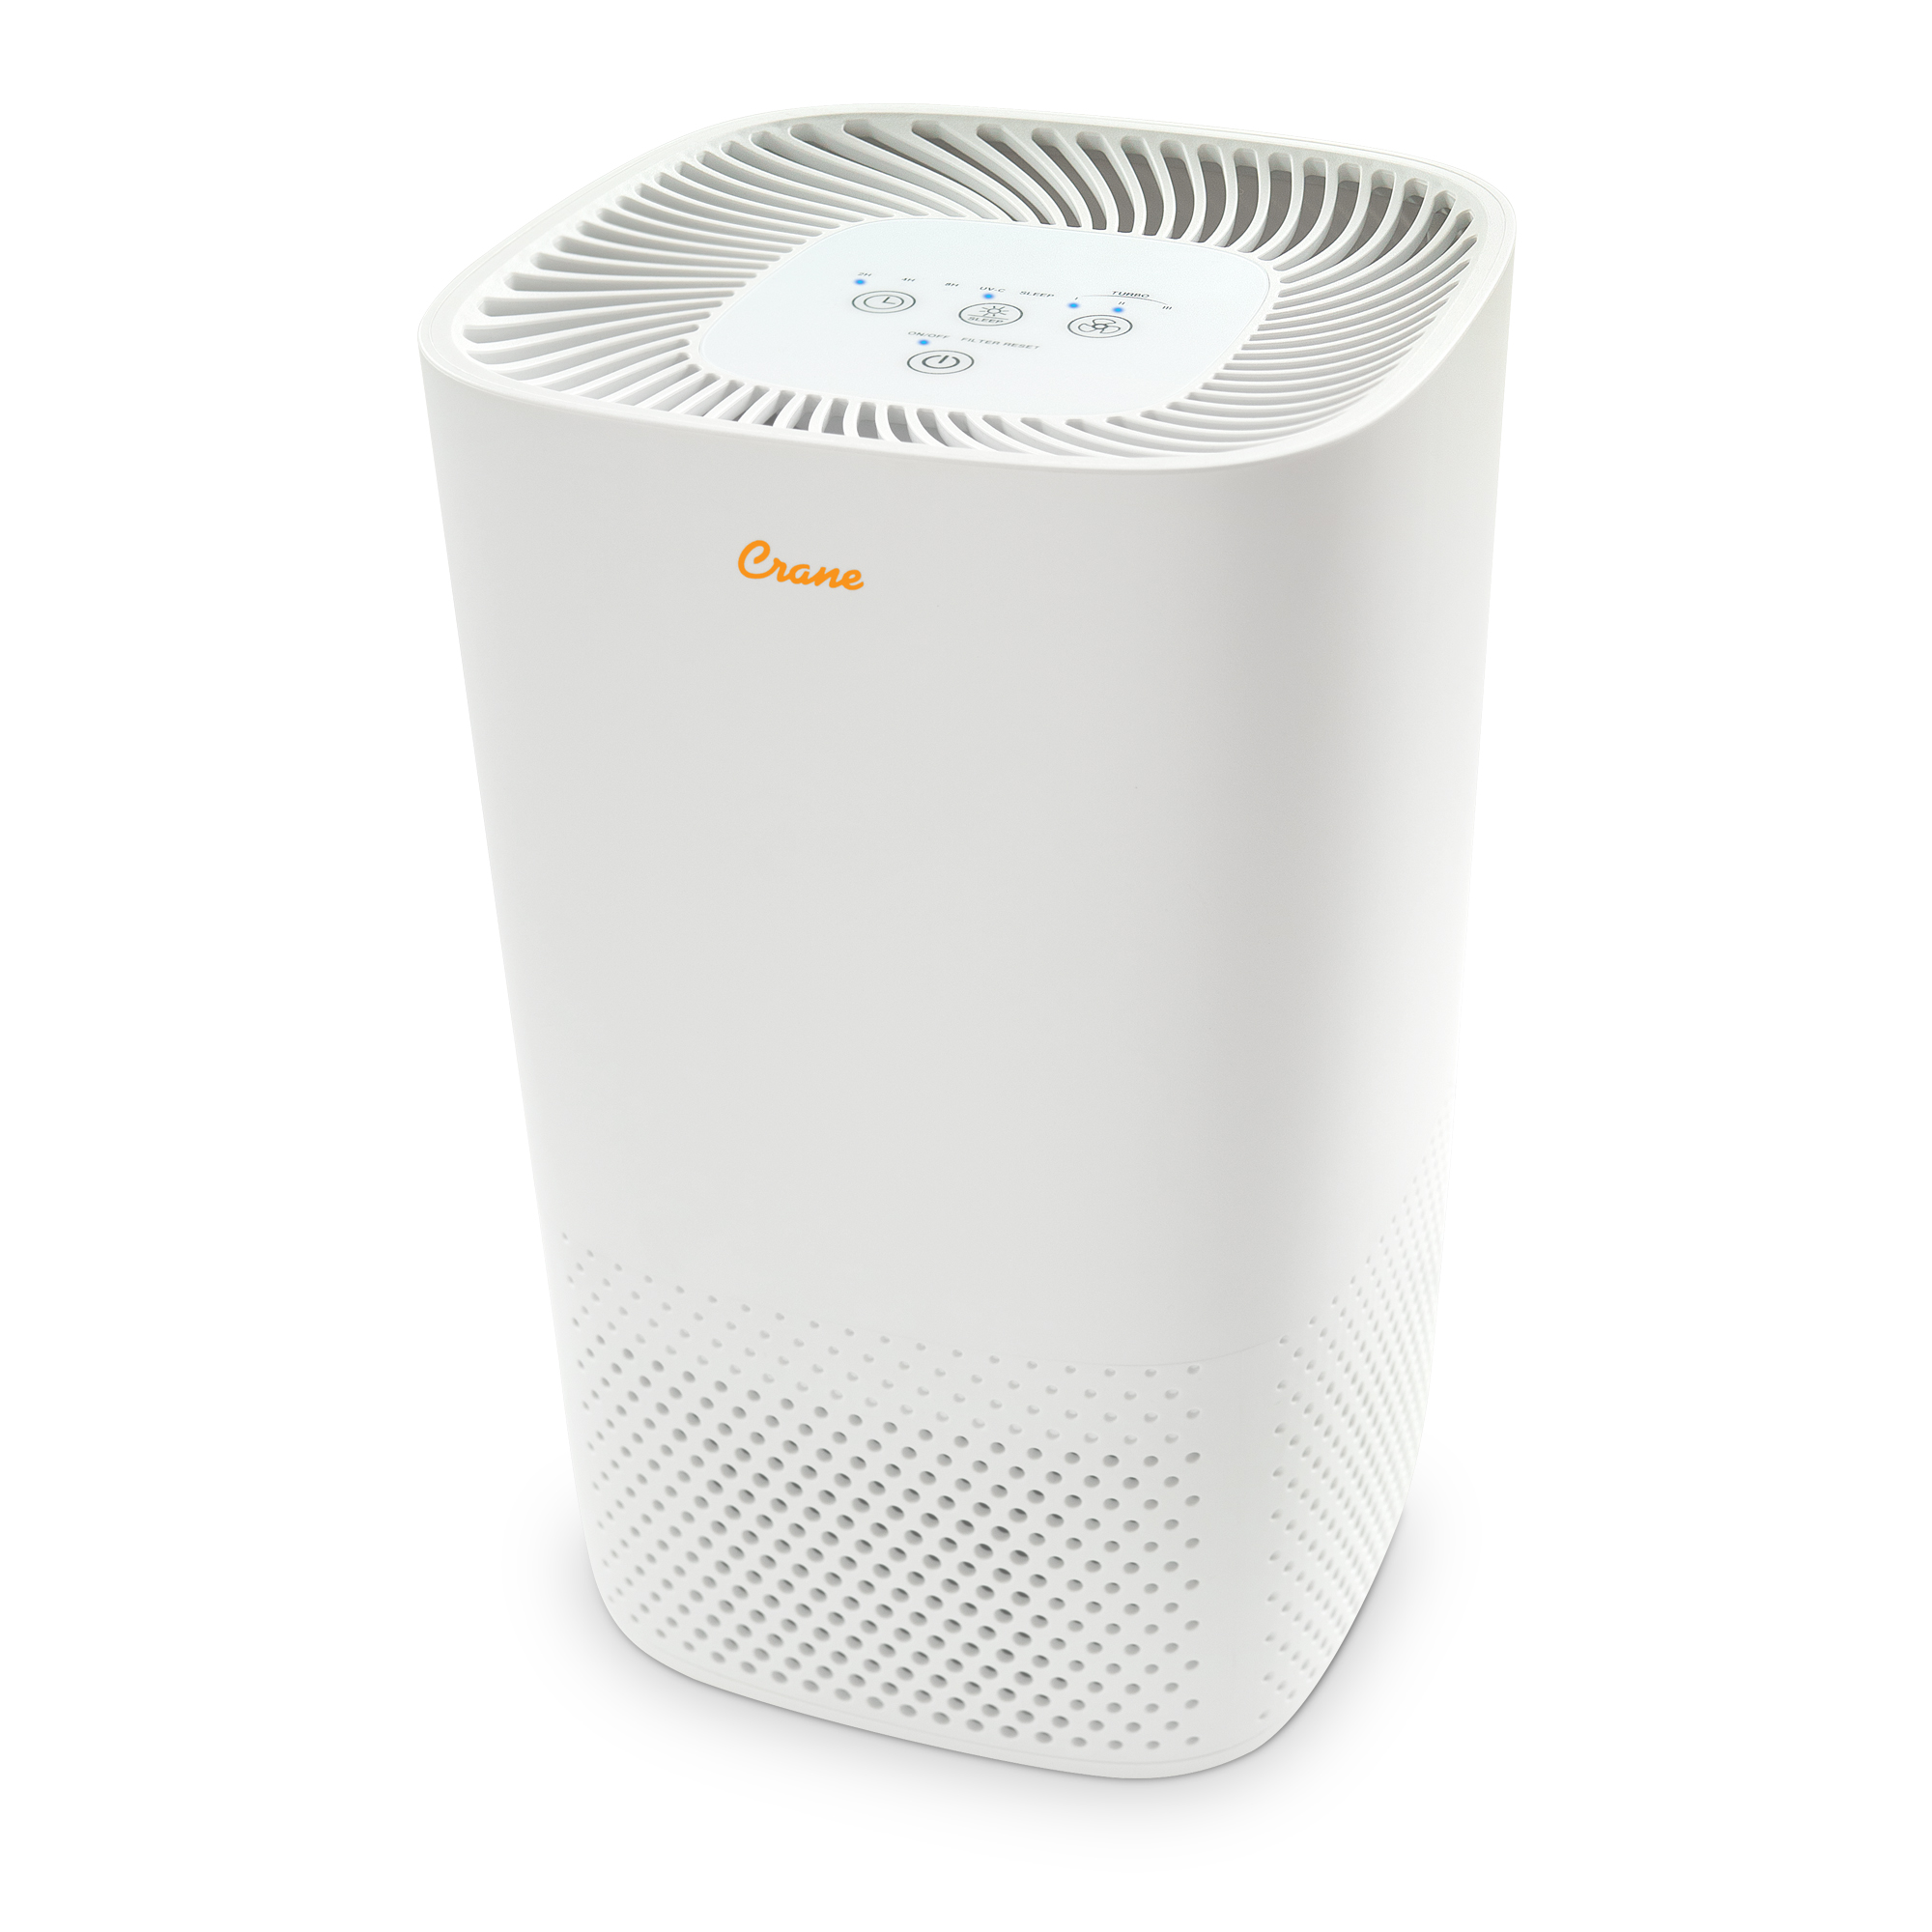 Levoit True HEPA Air Purifier White Medium Room with Extra Filter